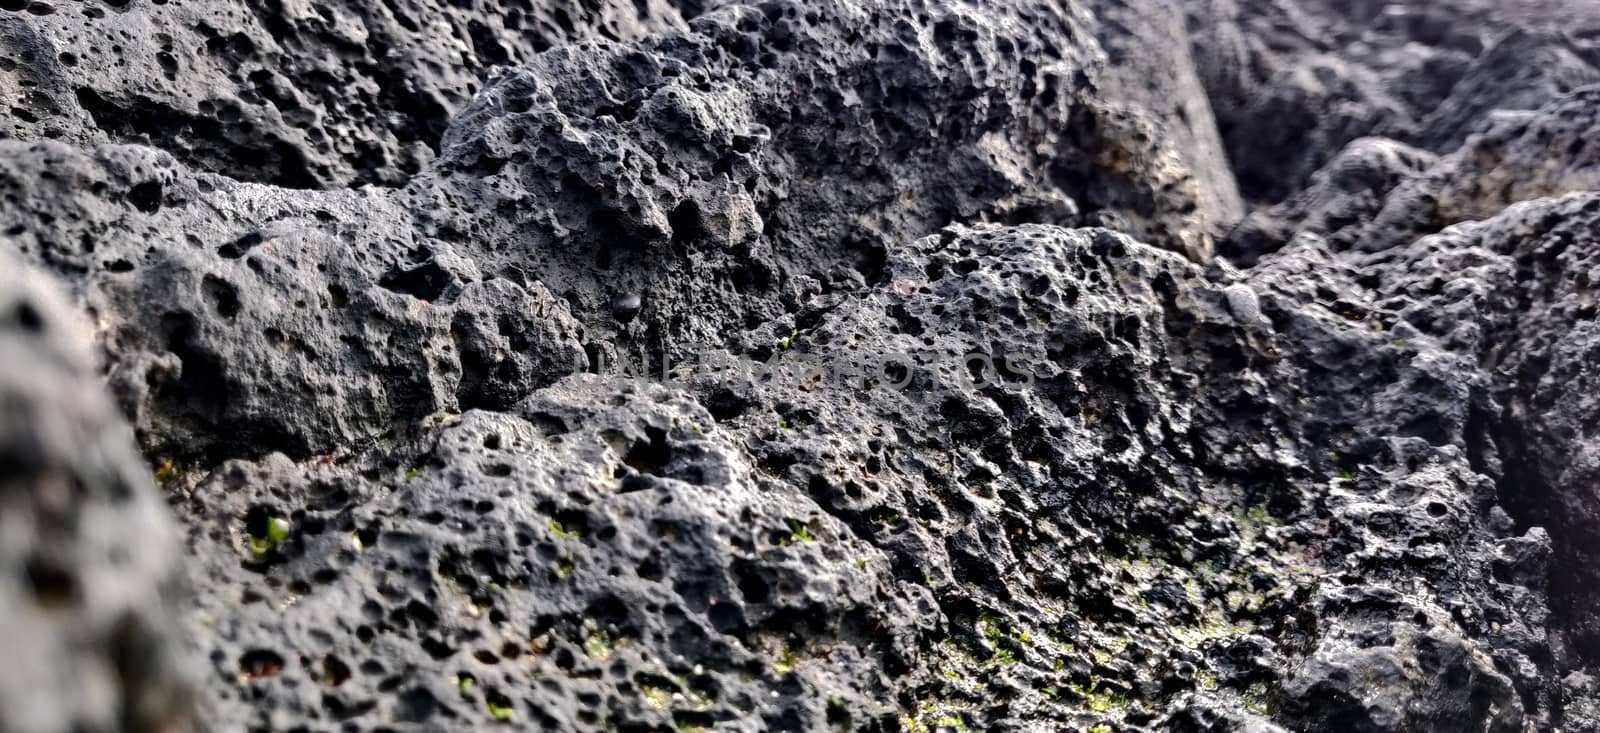 Macro shot of volcanic black rock on the hyeopjae beach while on vacation in jeju island, south korea